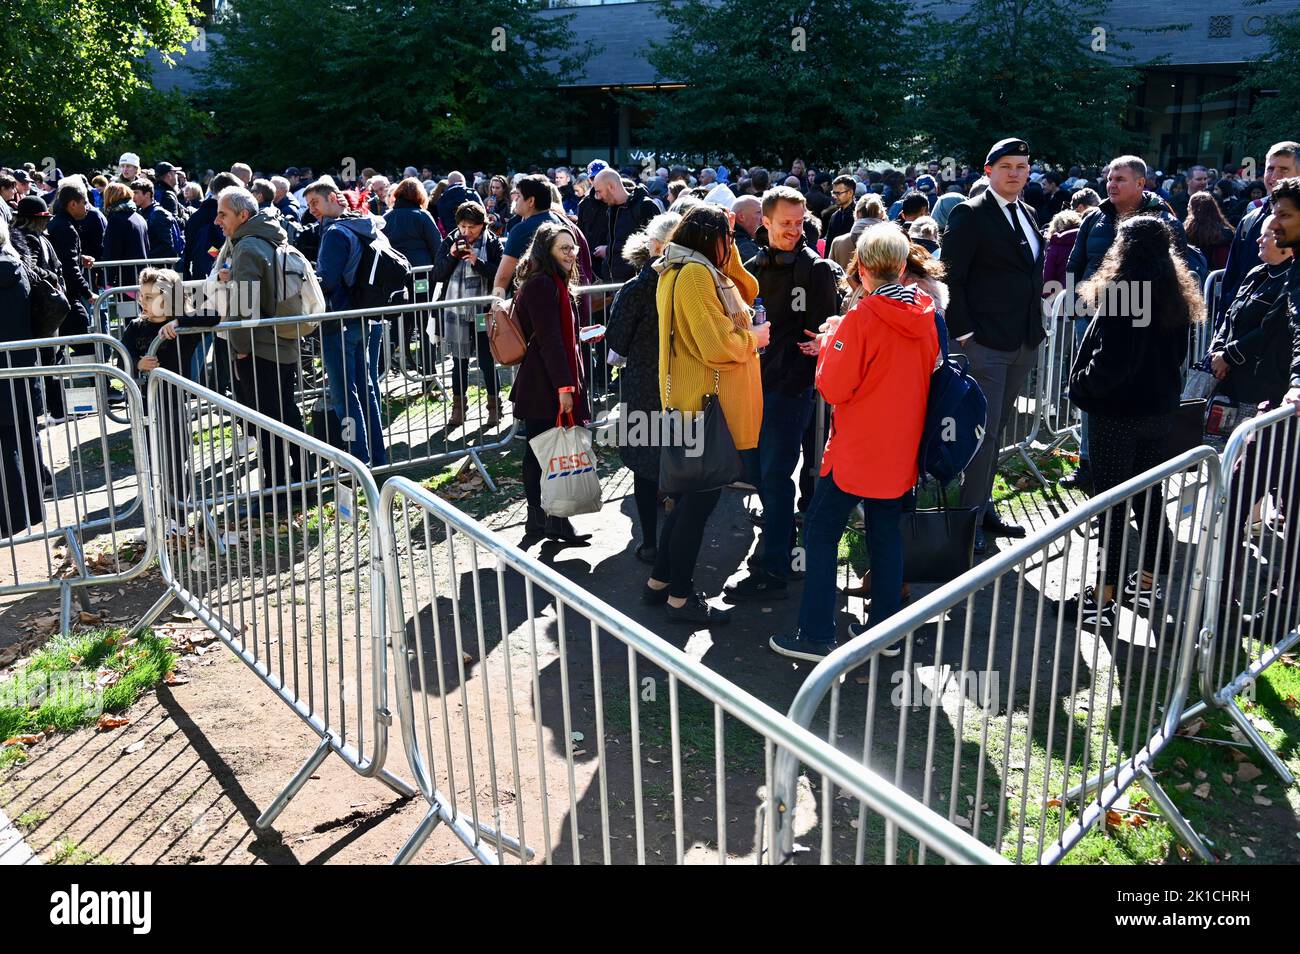 London, UK. Potters Fields Park, near Tower Bridge. The queue for Queen Elizabeth II's Lying-in-State stretched from Southwark Park to Westminster Hall taking up to 14 hours to reach it's destination. Credit: michael melia/Alamy Live News Stock Photo